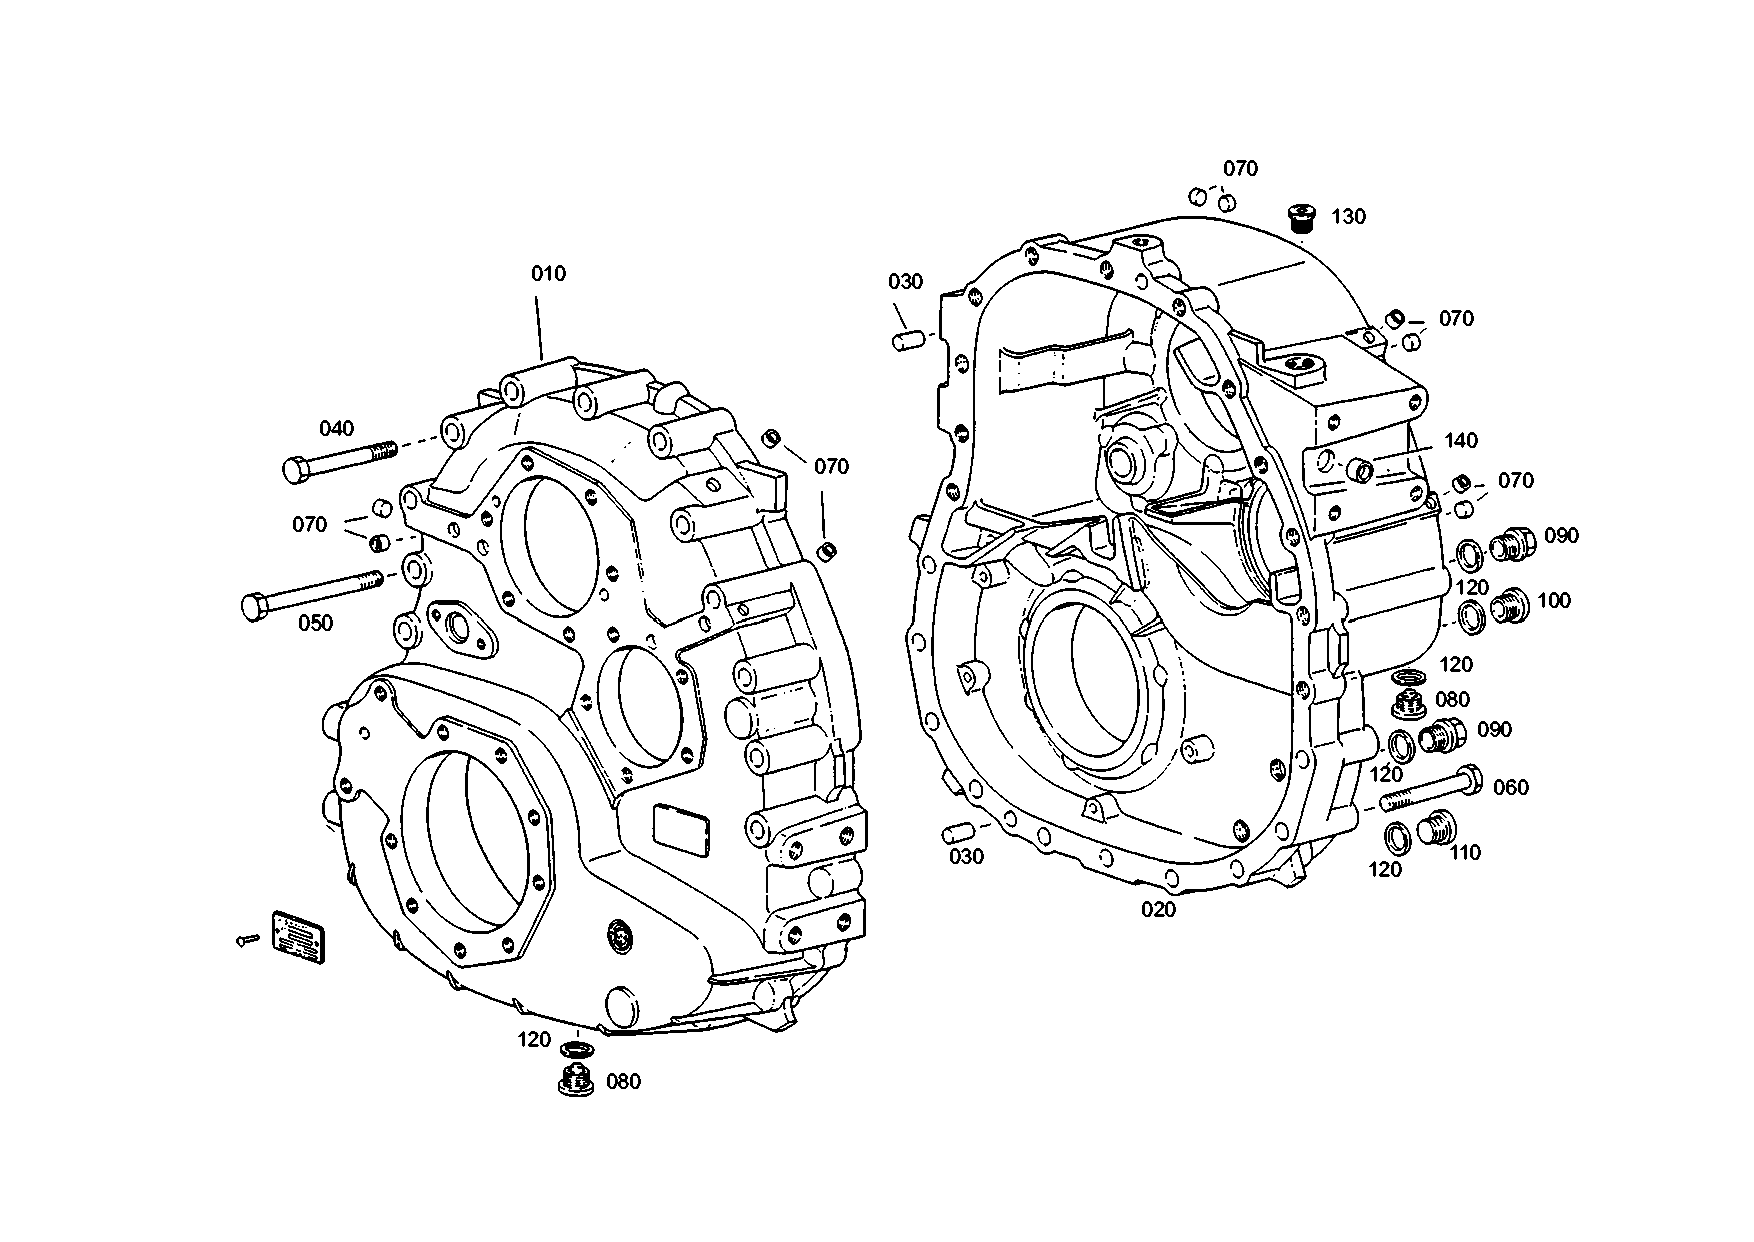 drawing for OY SISU AUTO AB 42569581 - END CAP (figure 5)